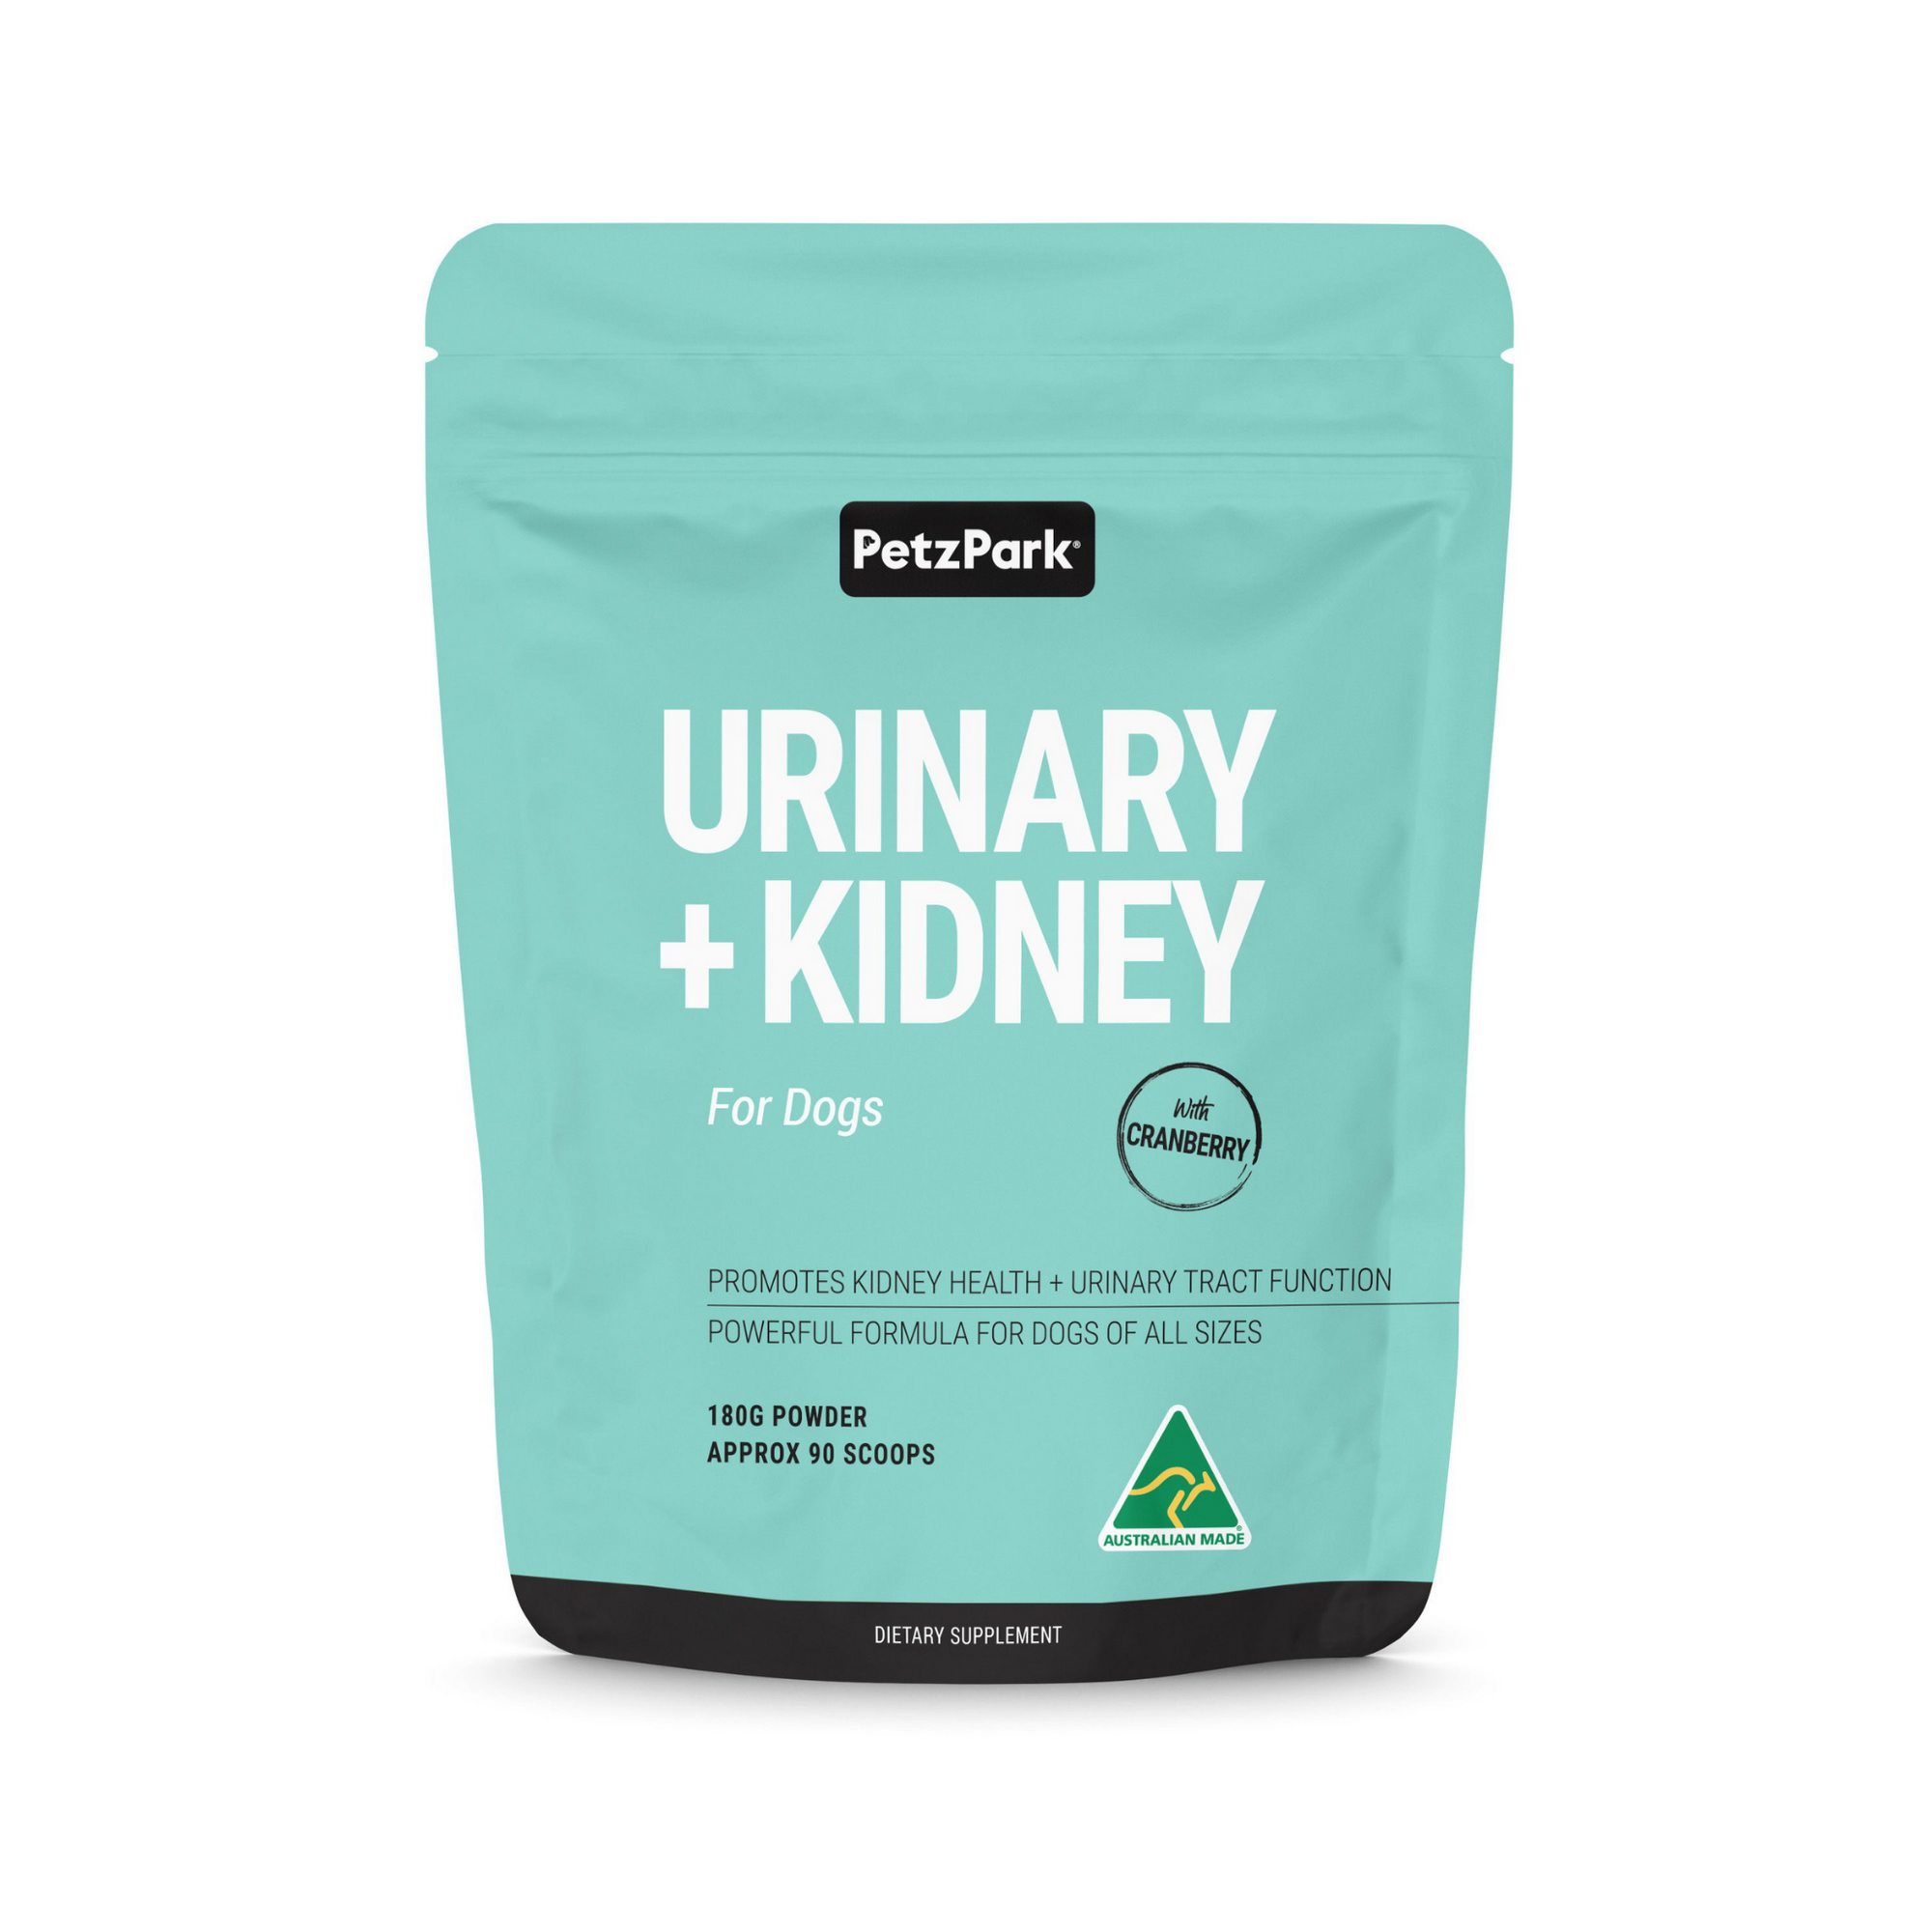 Urinary and Kidney supplements for pets by von hound and friends